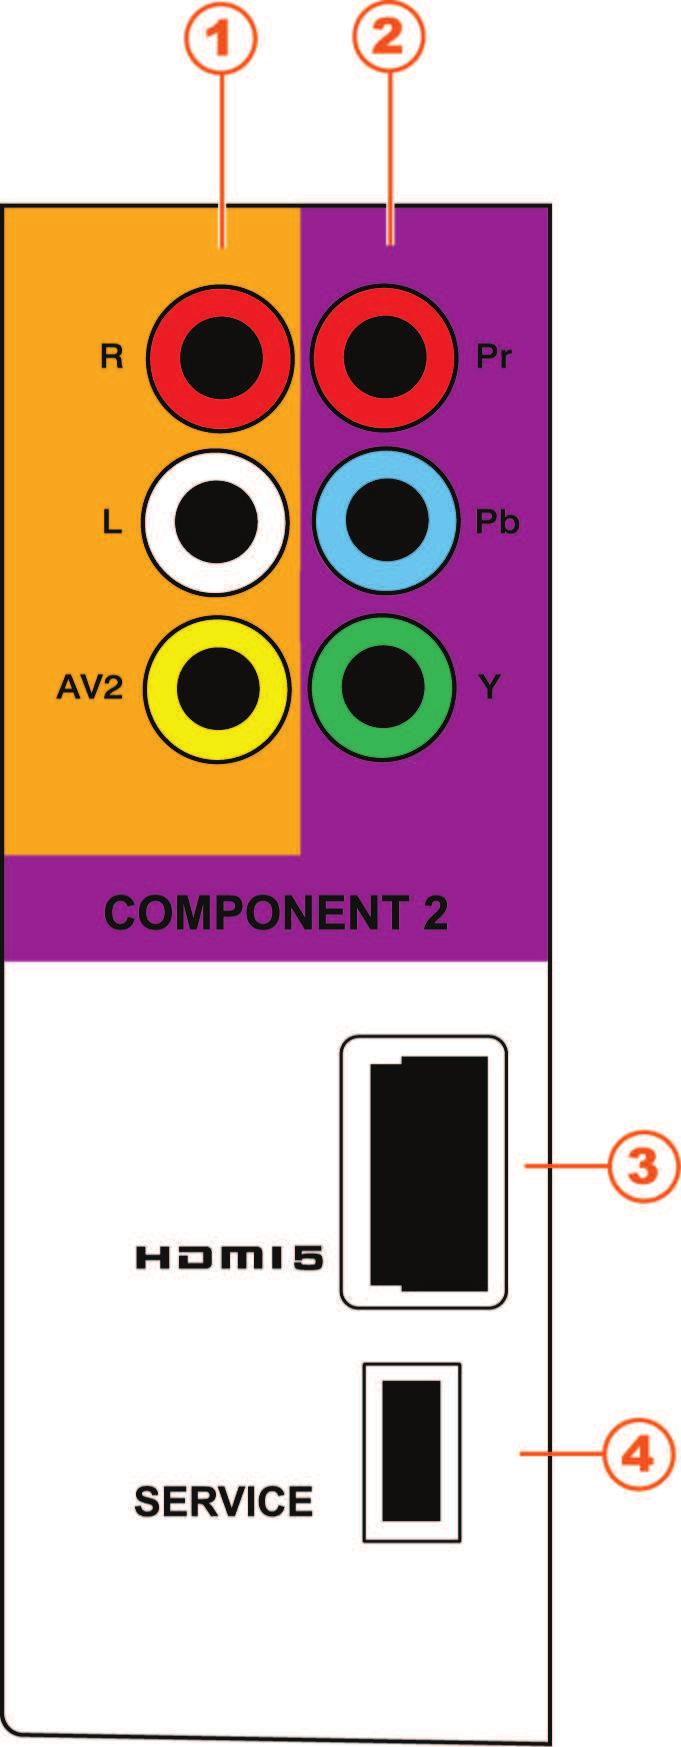 Right-Side Panel Connection 1. AV2 Connect the secondary source for composite video devices, such as a VCR, camcorder, or video game.